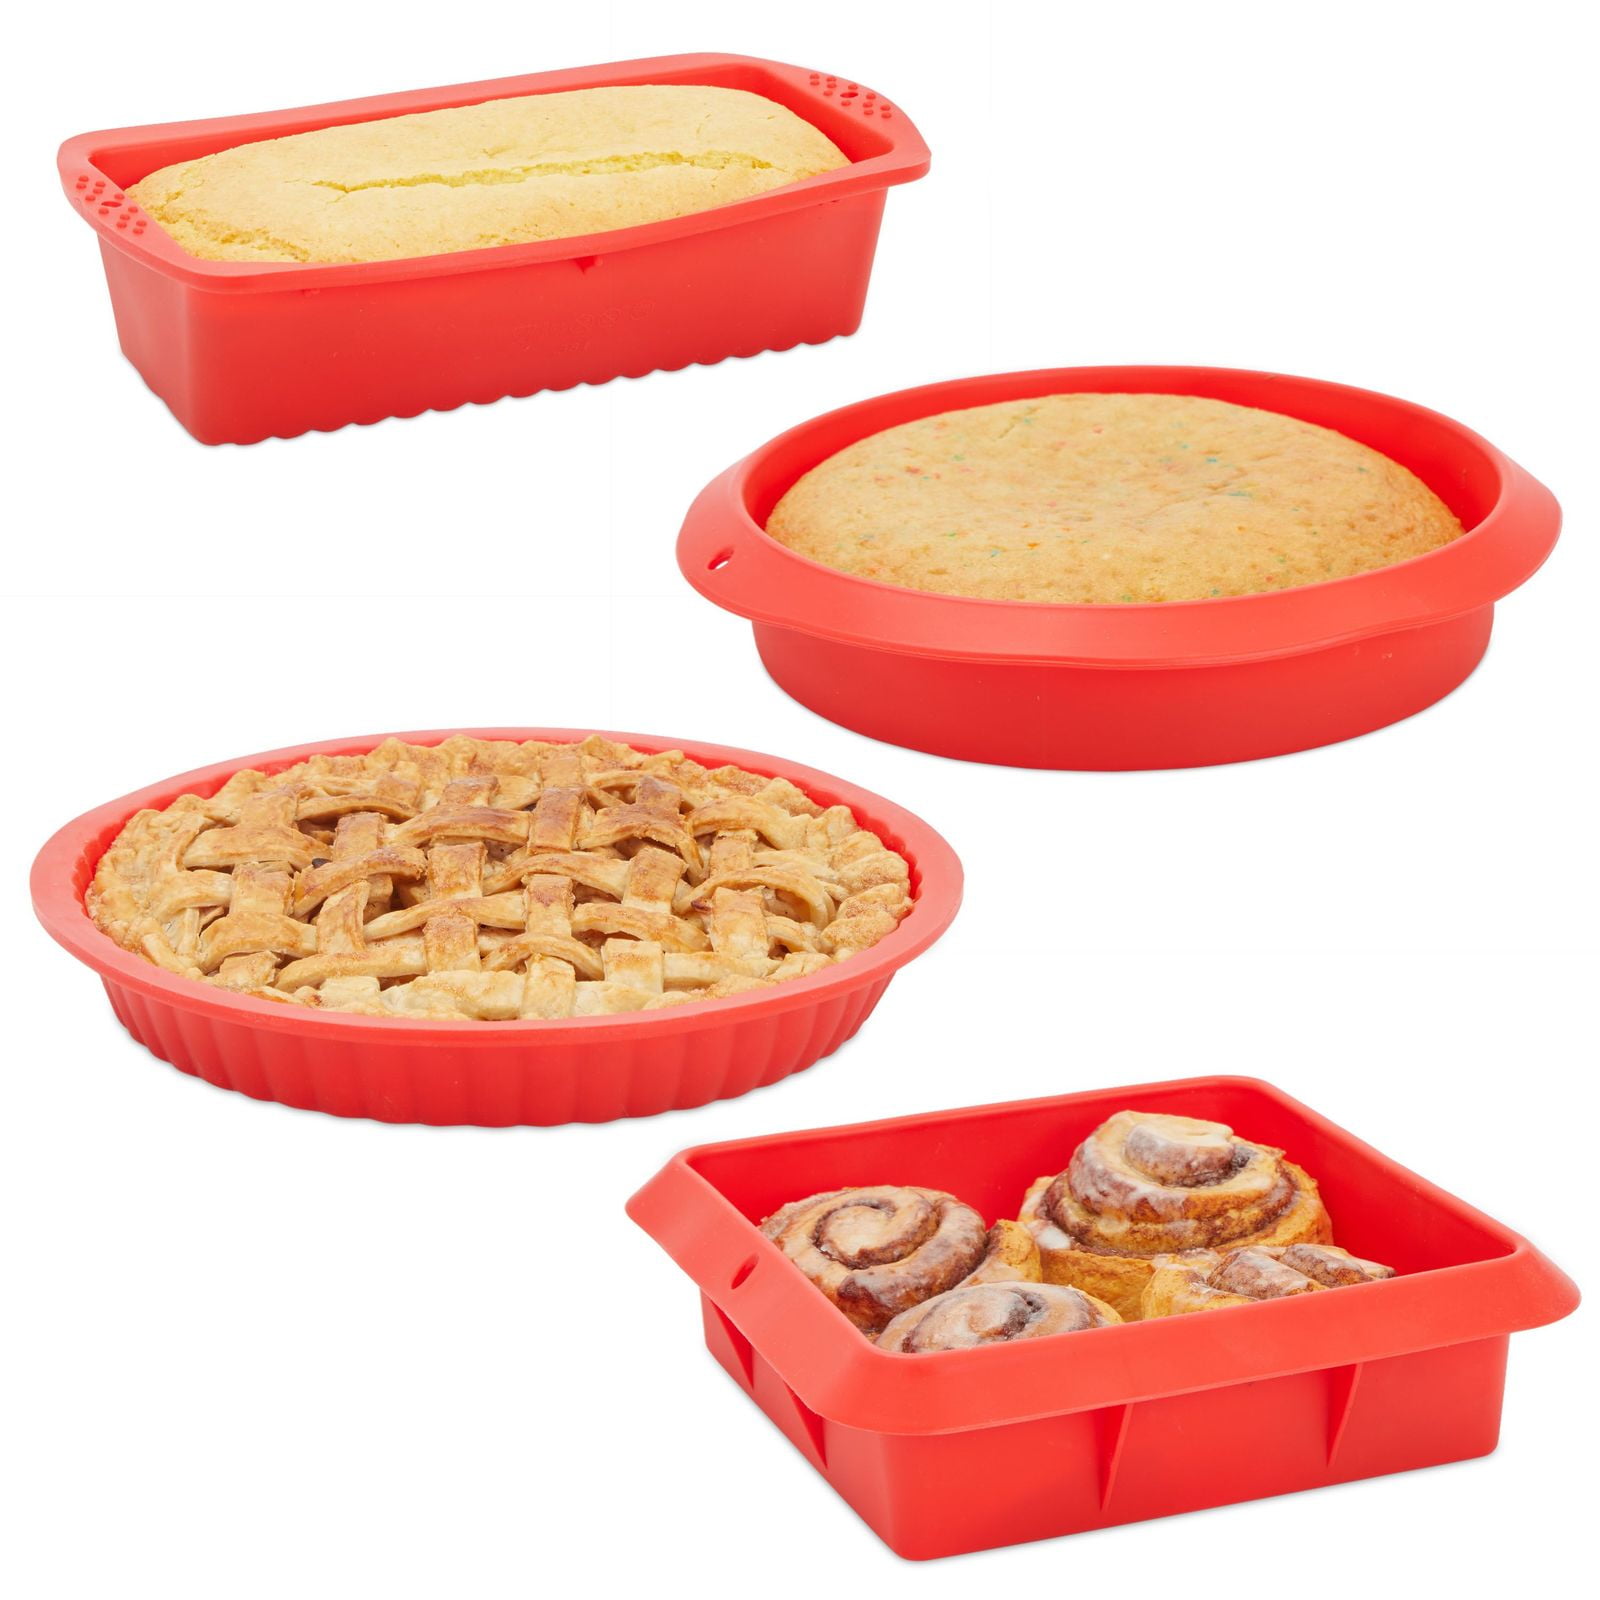 6/8/9" Silicone Round Bread Mold Cake Pan Muffin Mould Bakeware Baking Tray L7Y7 